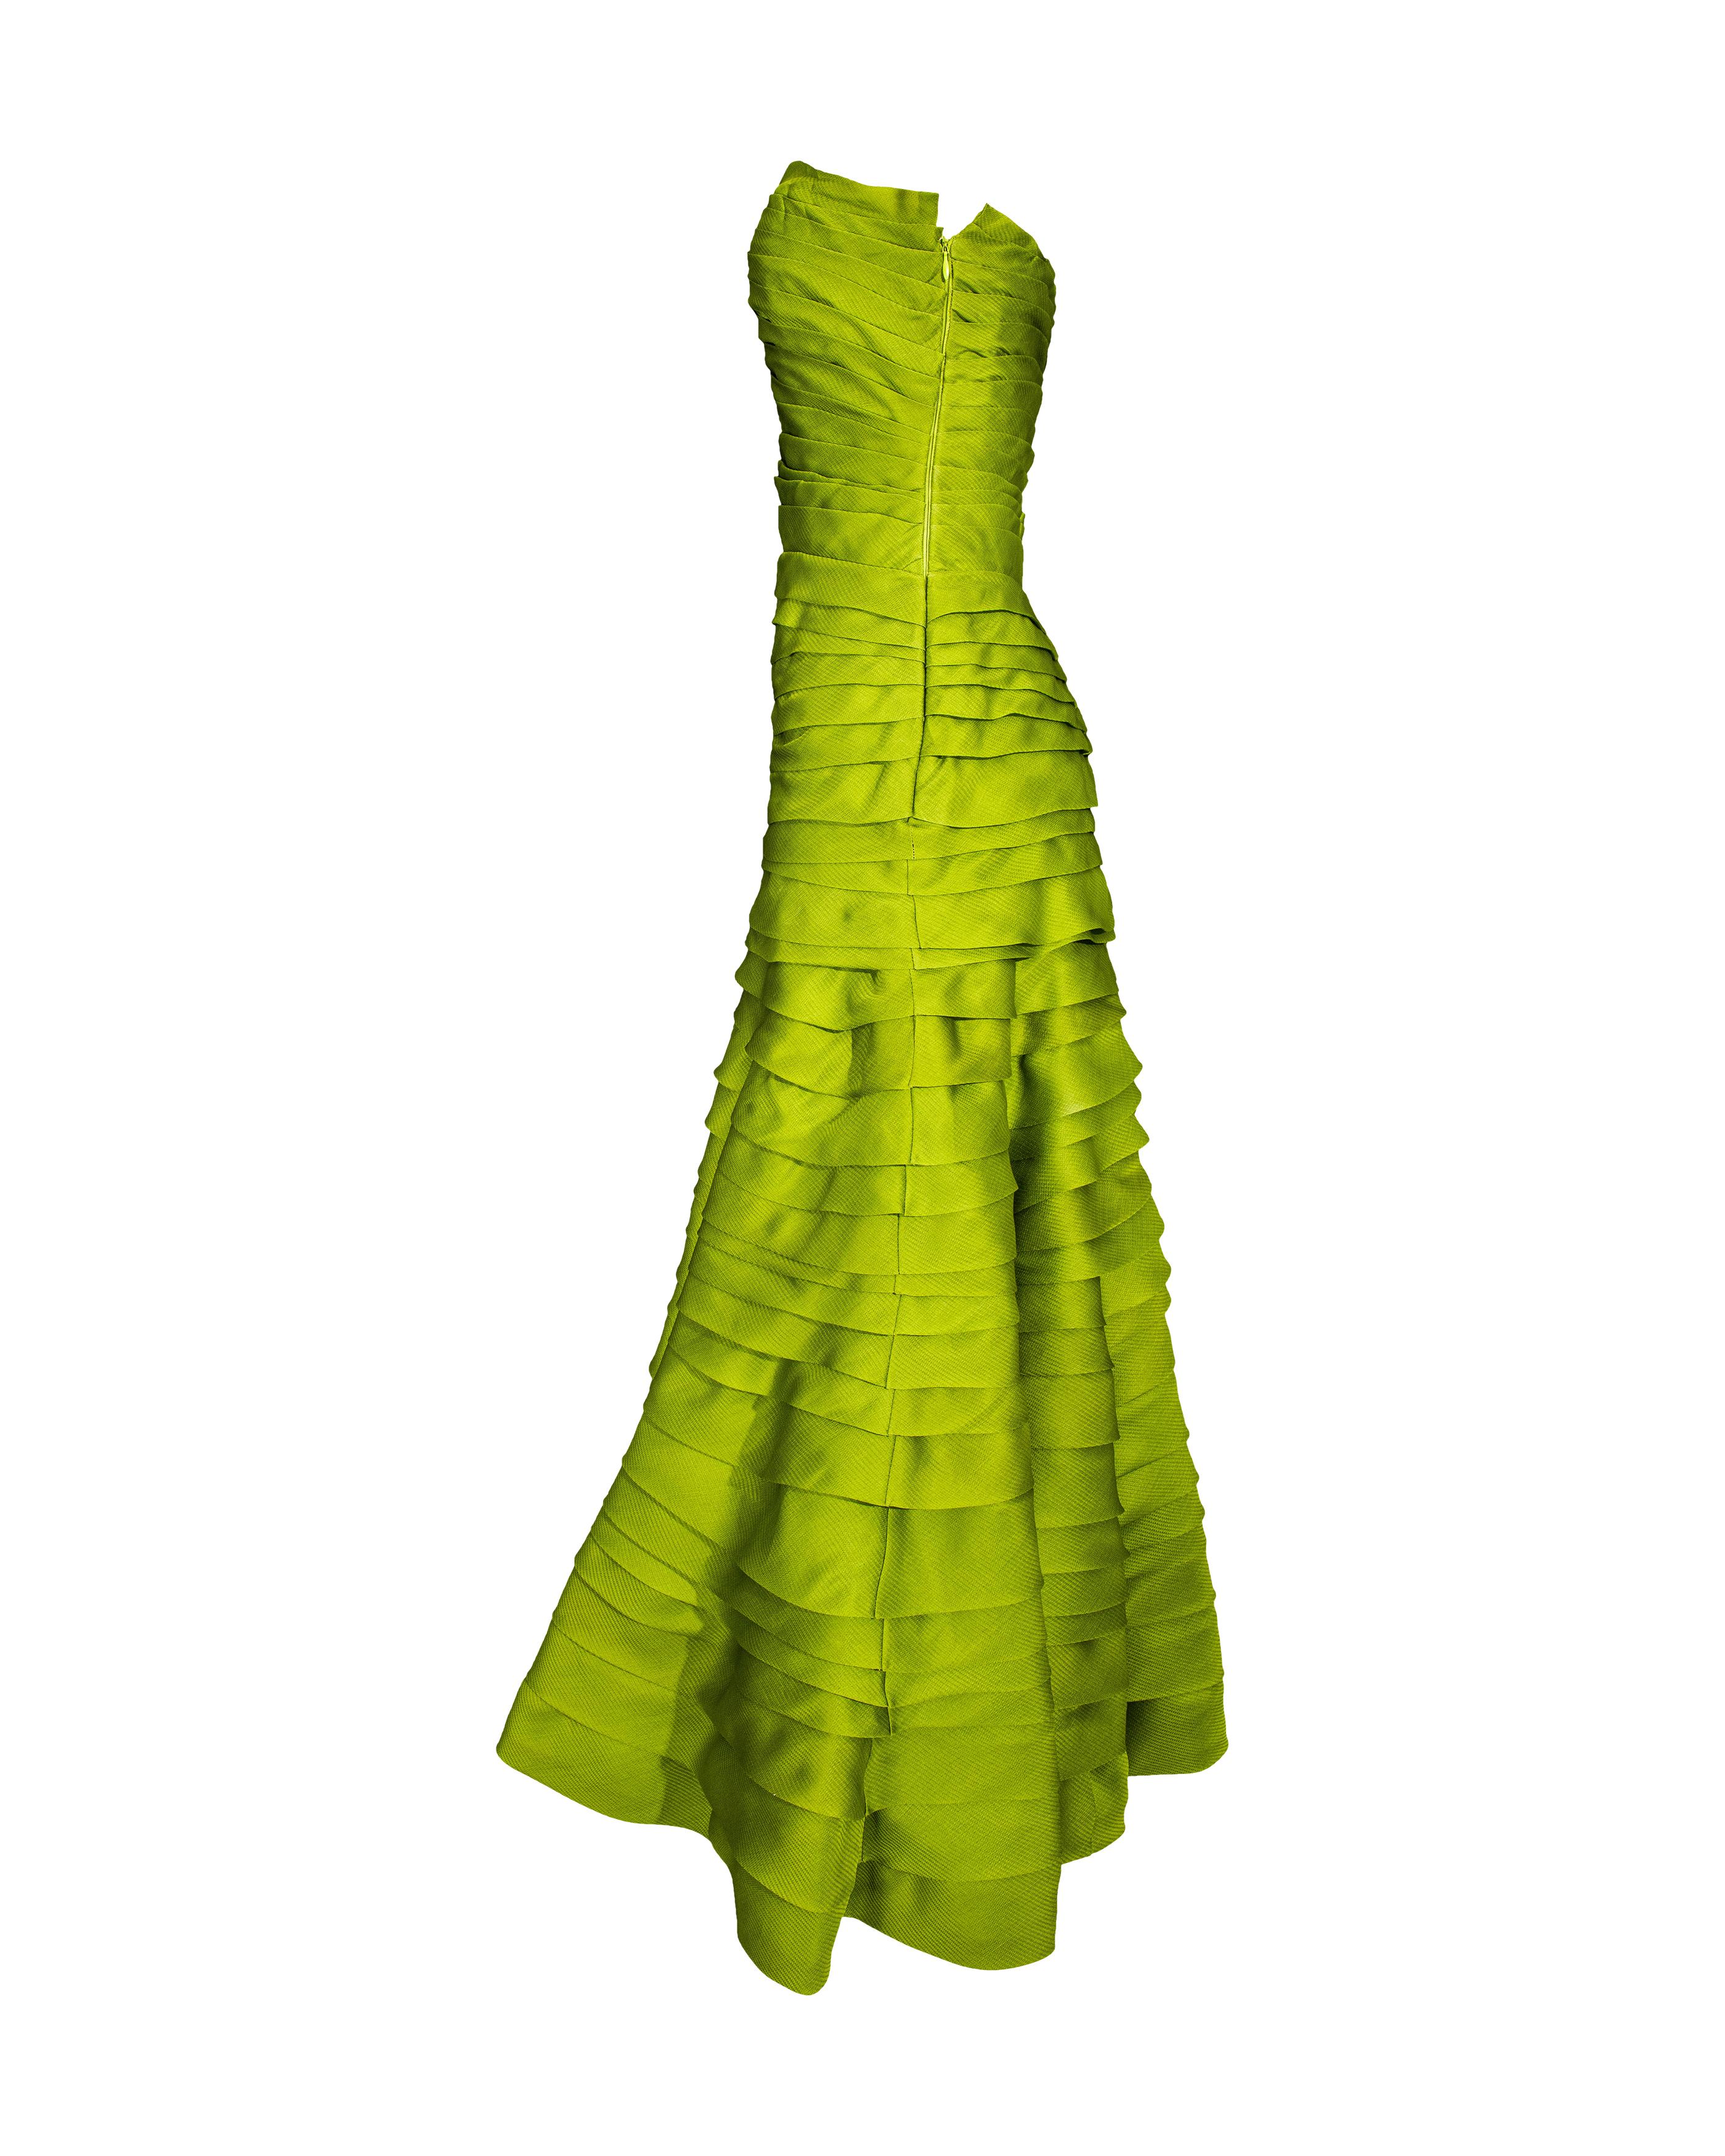 Women's A/W 2007 Christian Dior by John Galliano Green Strapless Pleated Gown